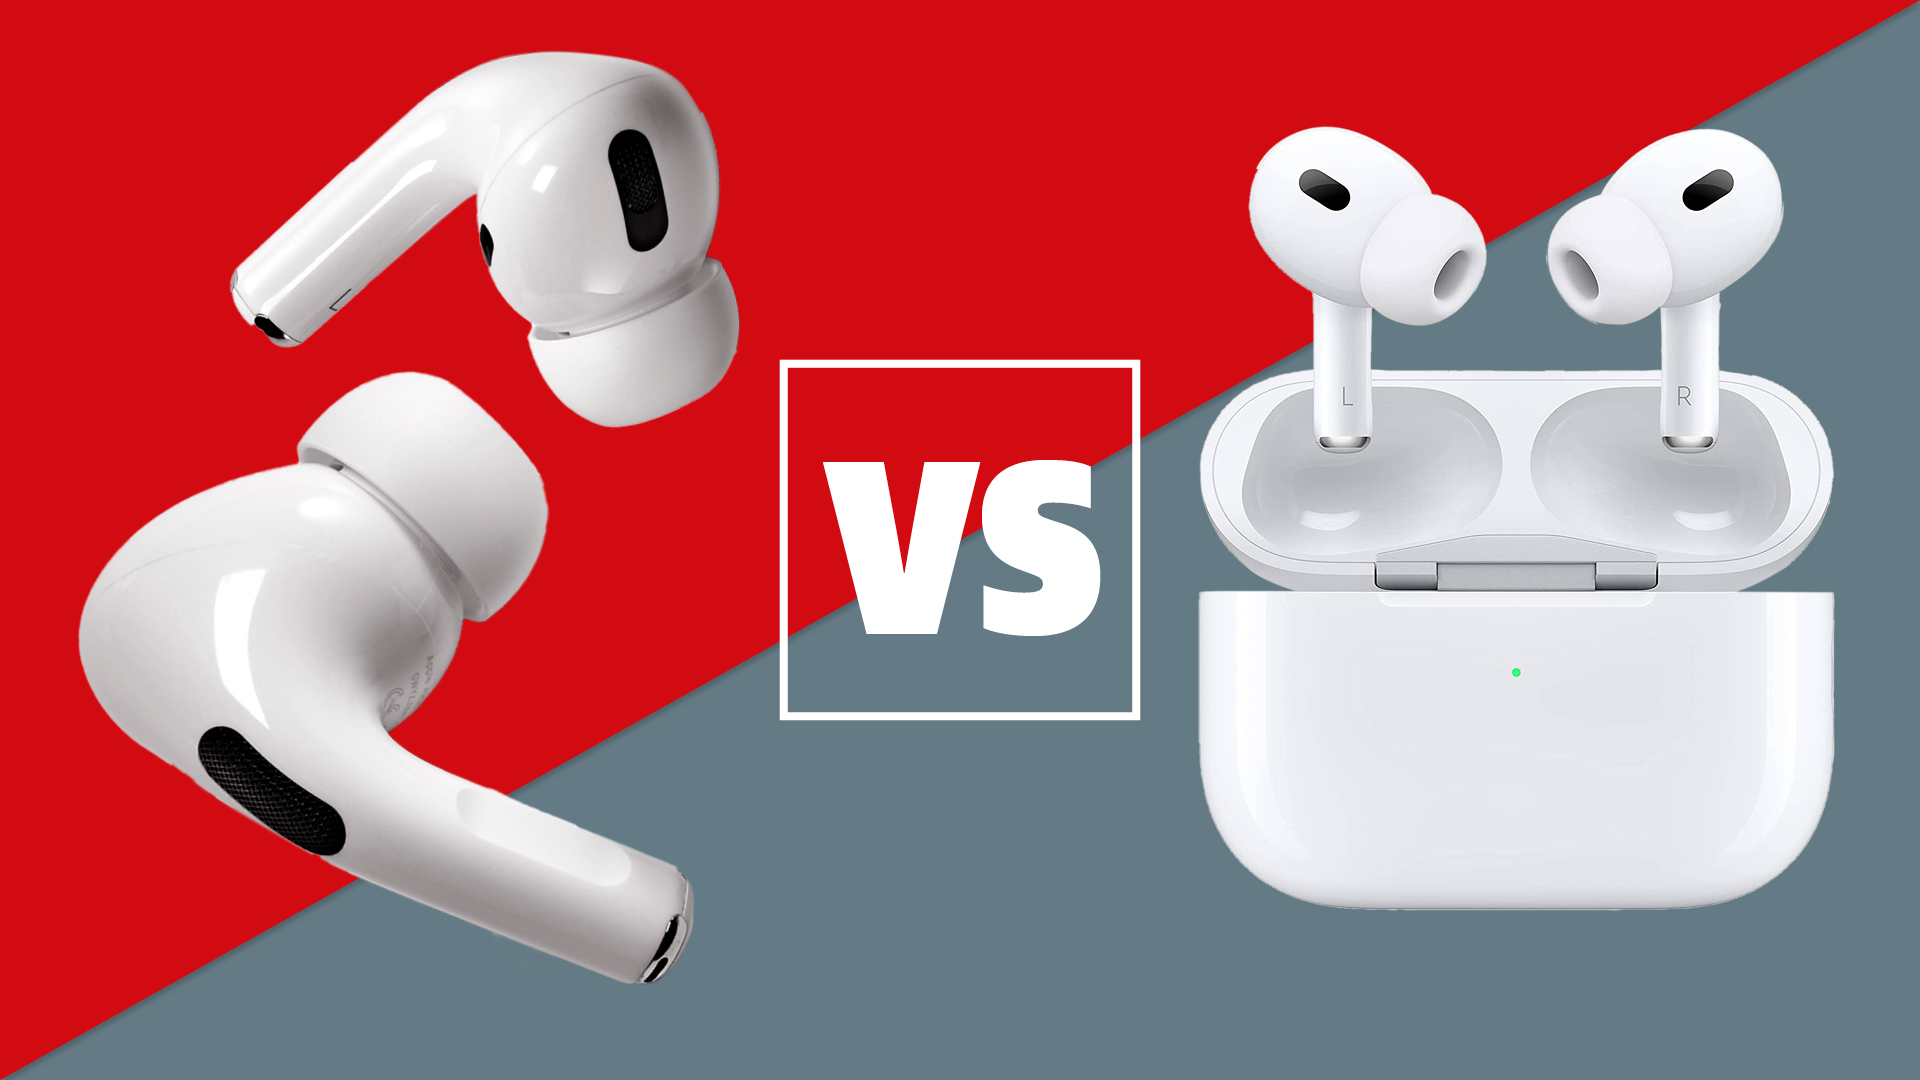 AirPods Pro 2022 review: Smarter AirPods that are (almost